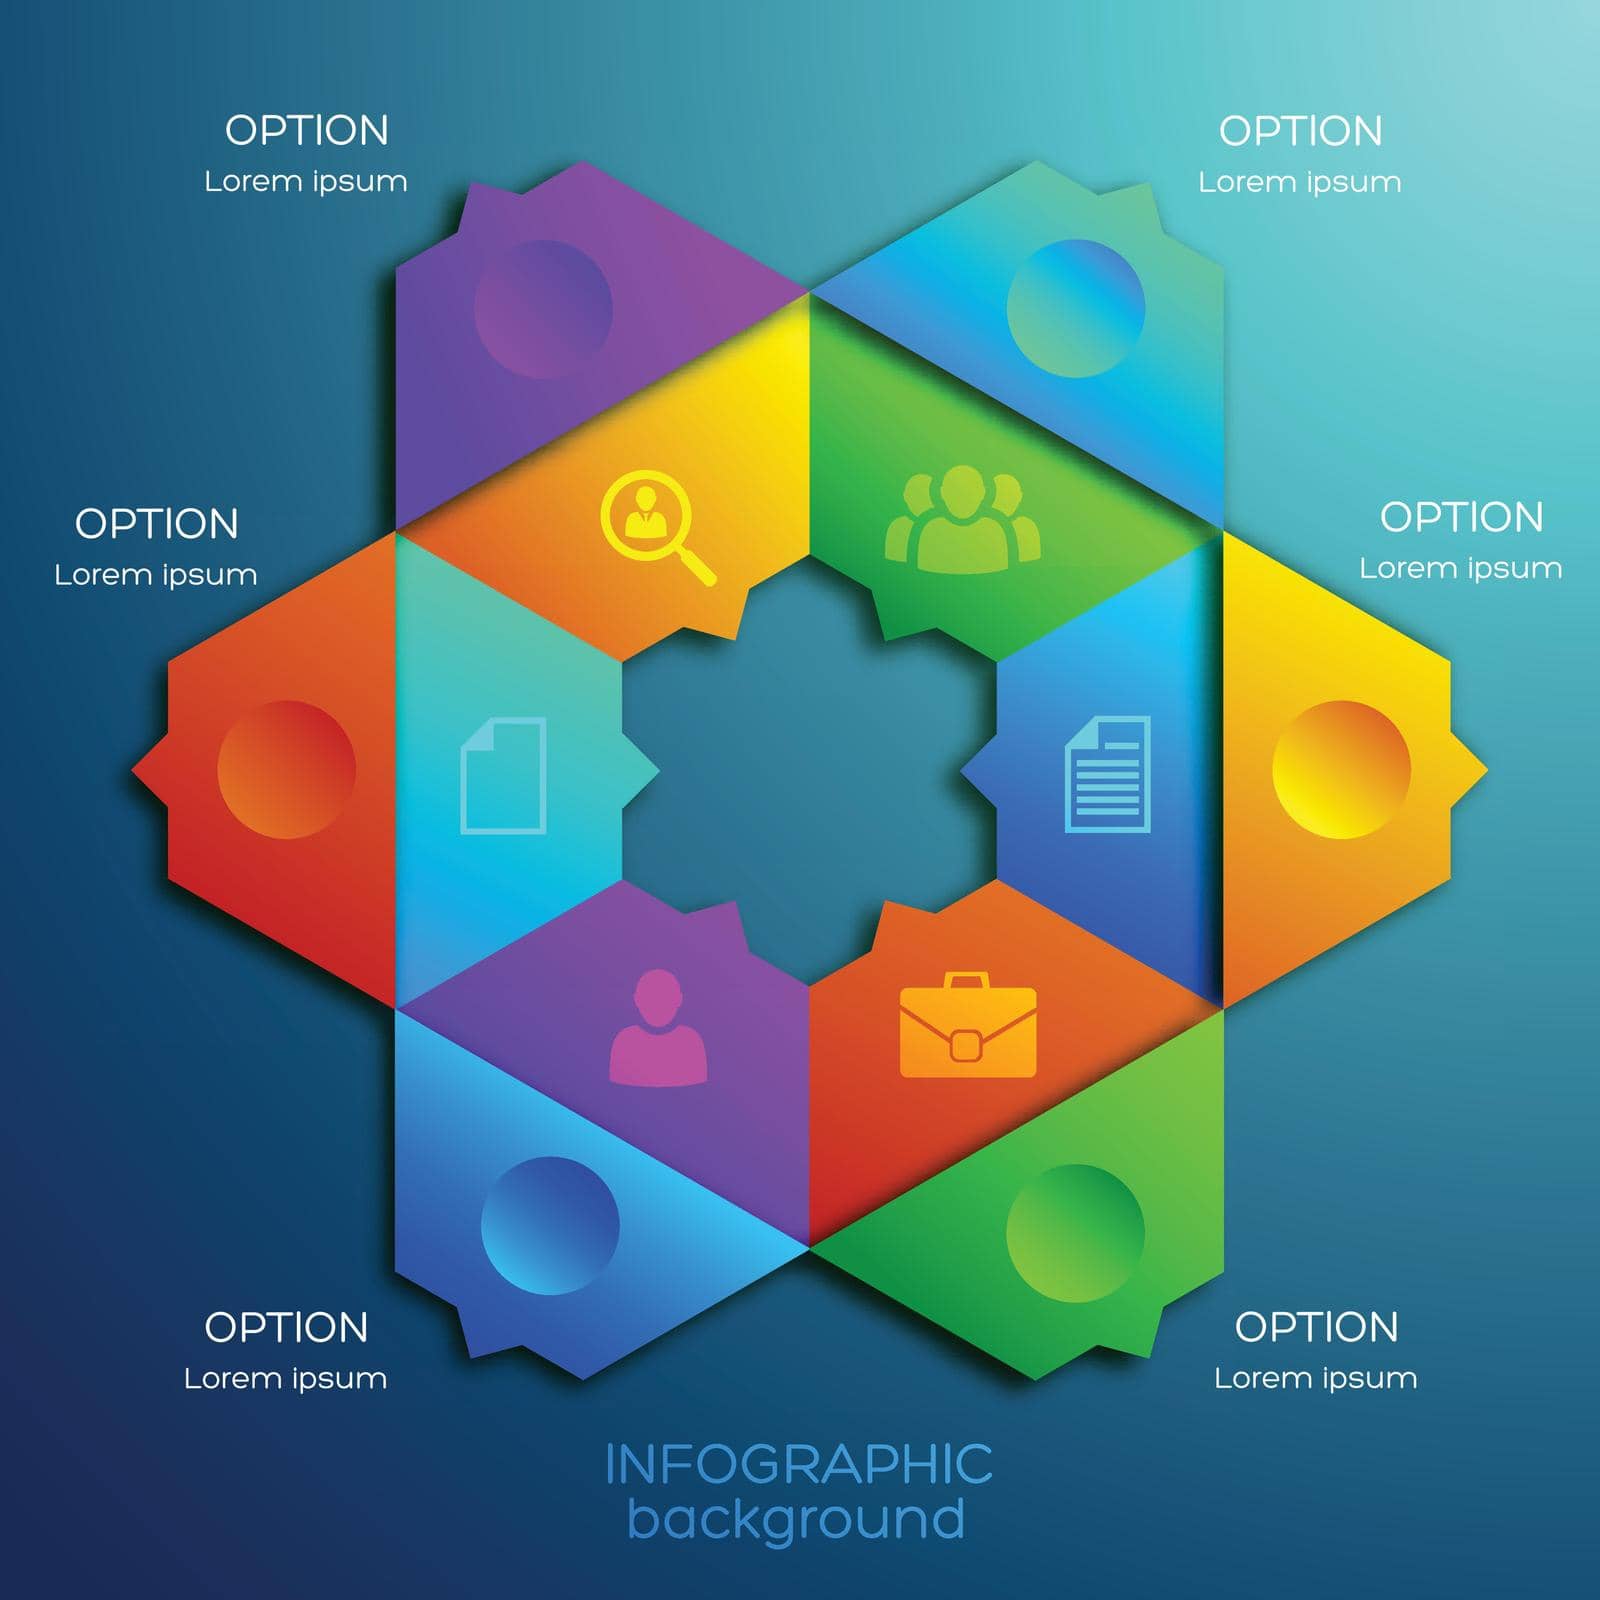 Business infographic design concept with colorful hexagonal diagram six options and icons vector illustration